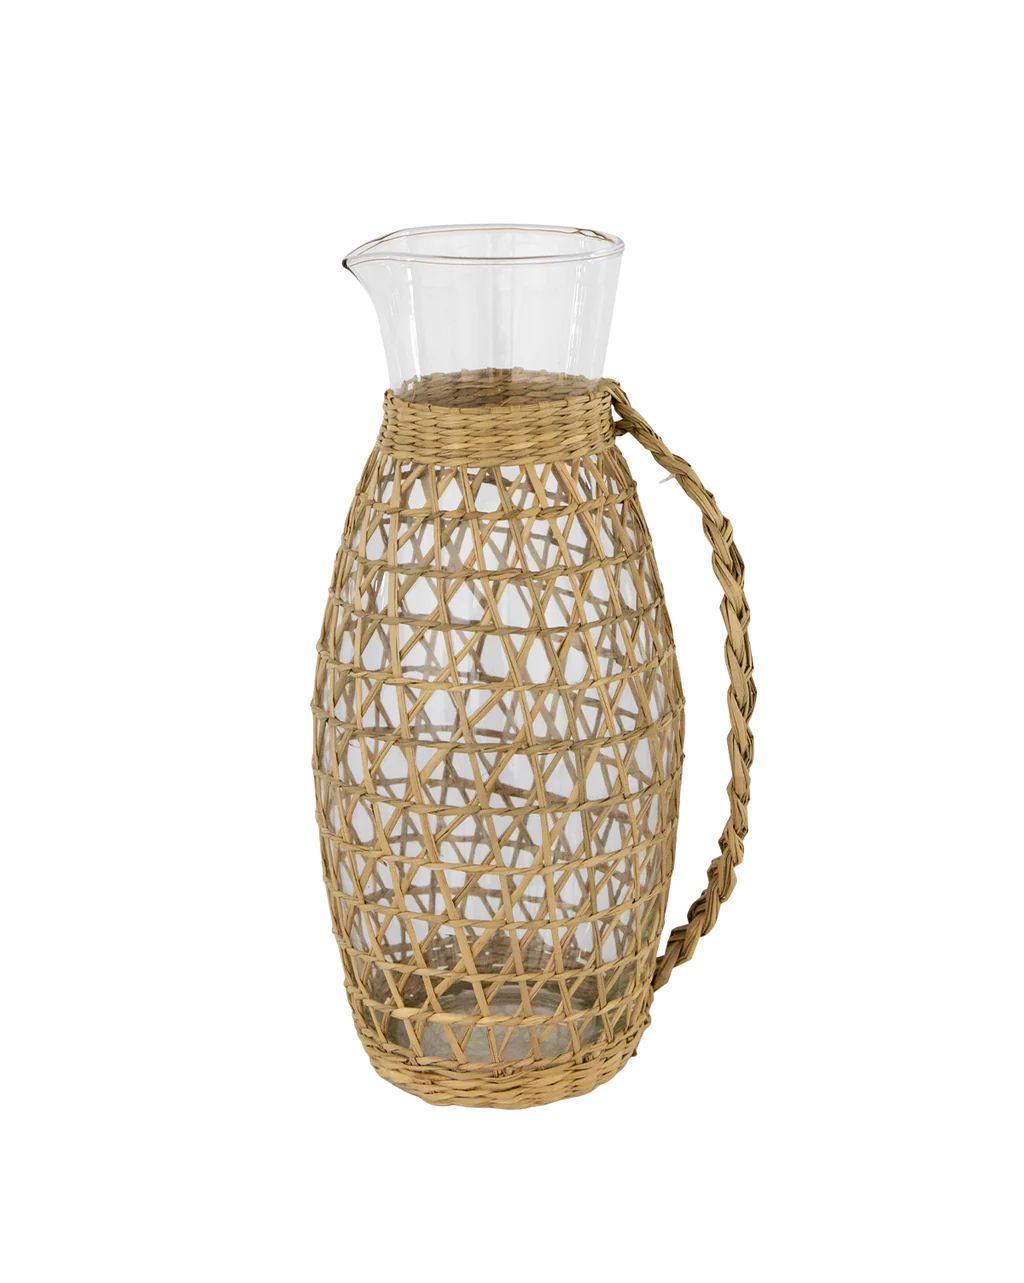 Samos Seagrass & Glass Pitcher | McGee & Co.